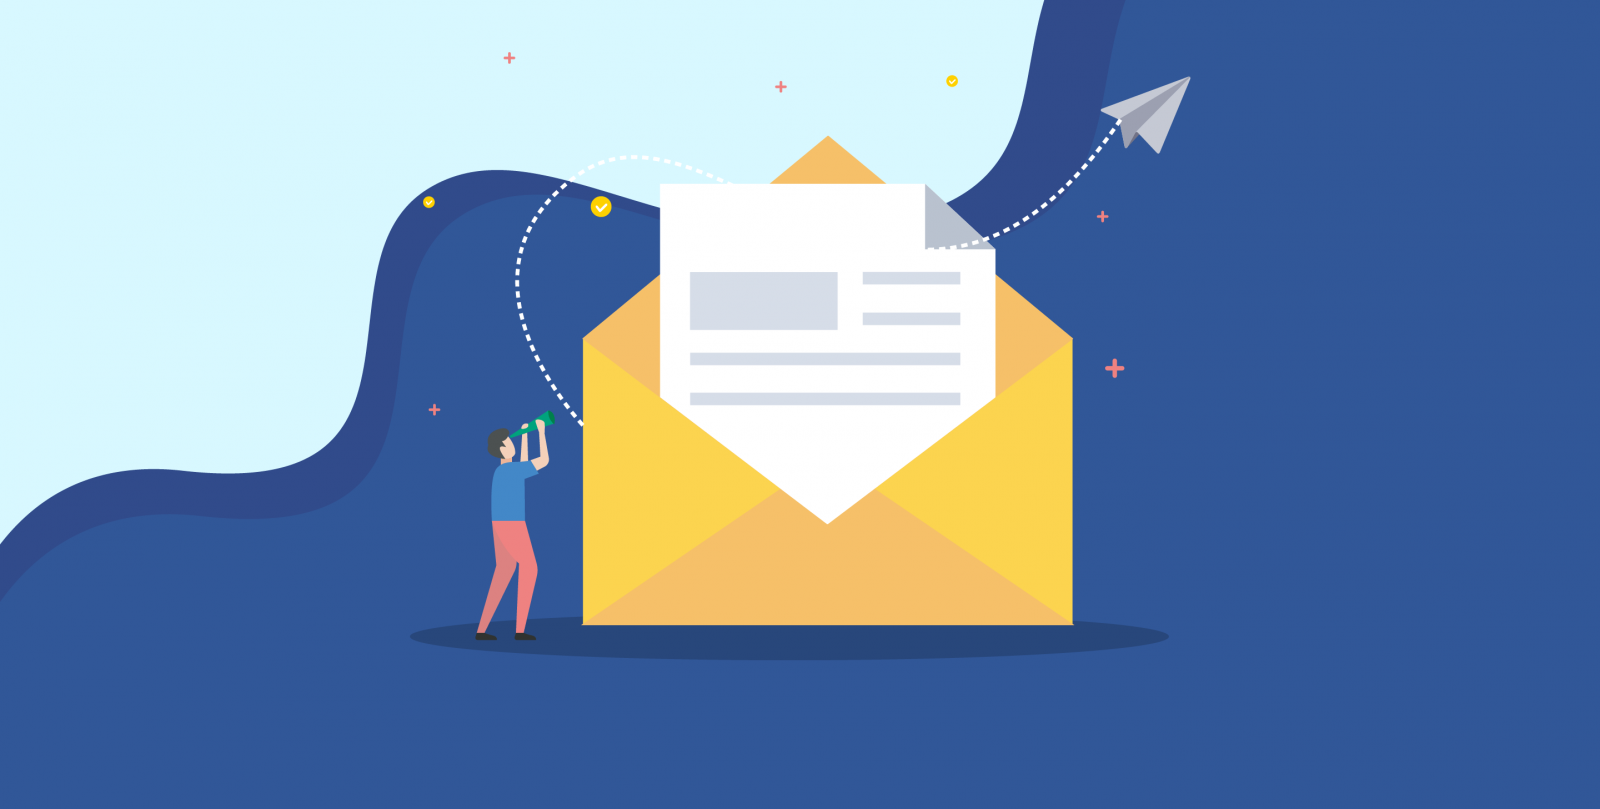 Want to score more hires? Here’s how recruitment email marketing can come to your rescue